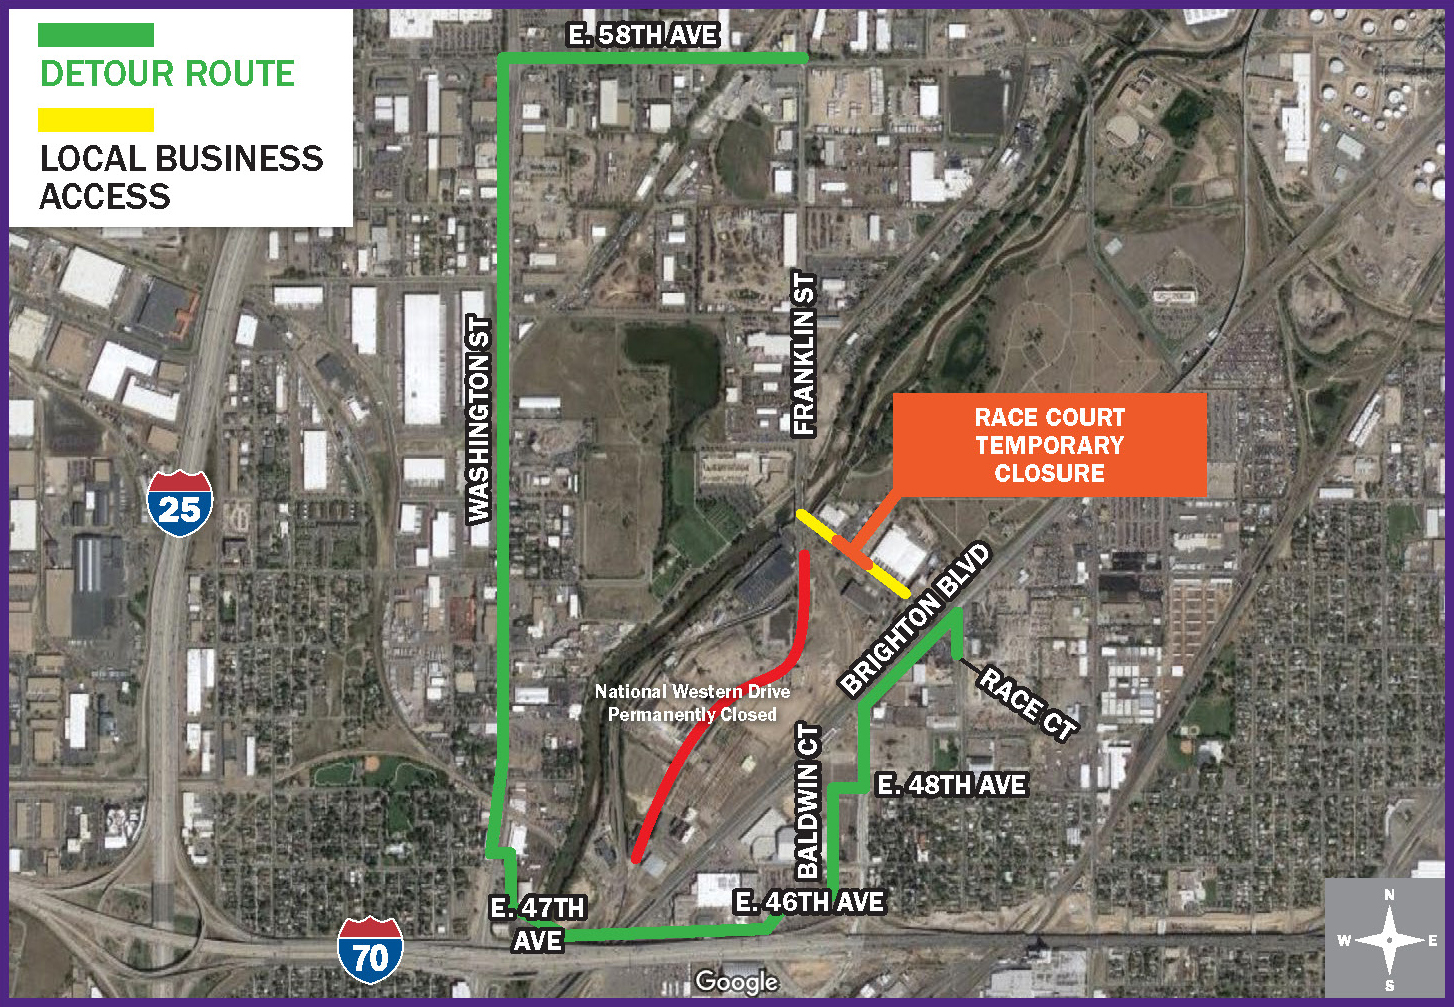 Detour map outlining the driving route around the May 8 Race Court closure.